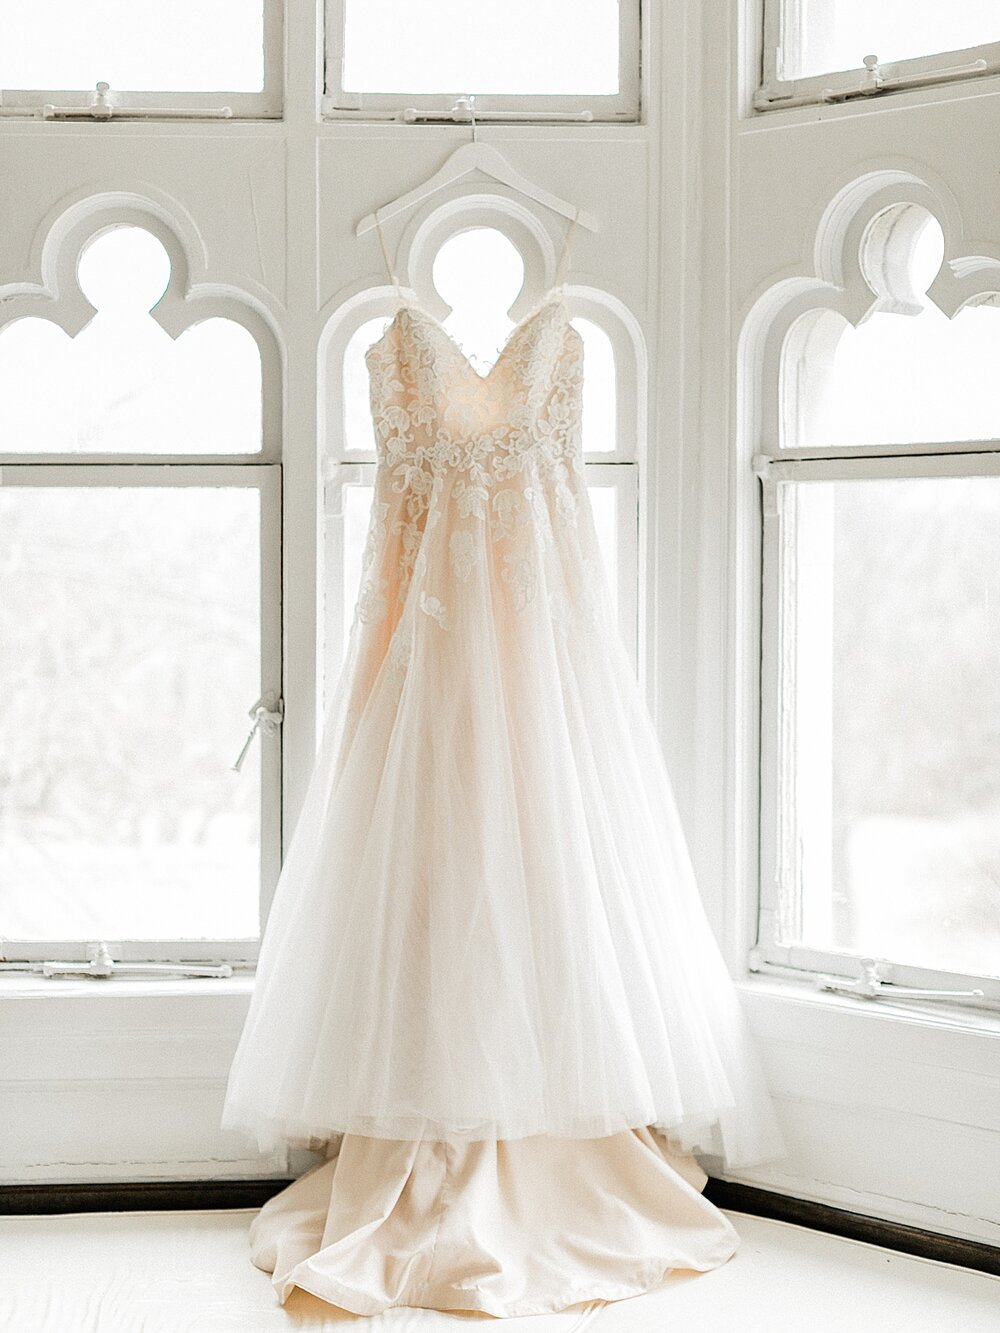 wedding dress hangs in detailed window at Hempstead House | Tri-State area wedding venues photographed by Asher Gardner Photography